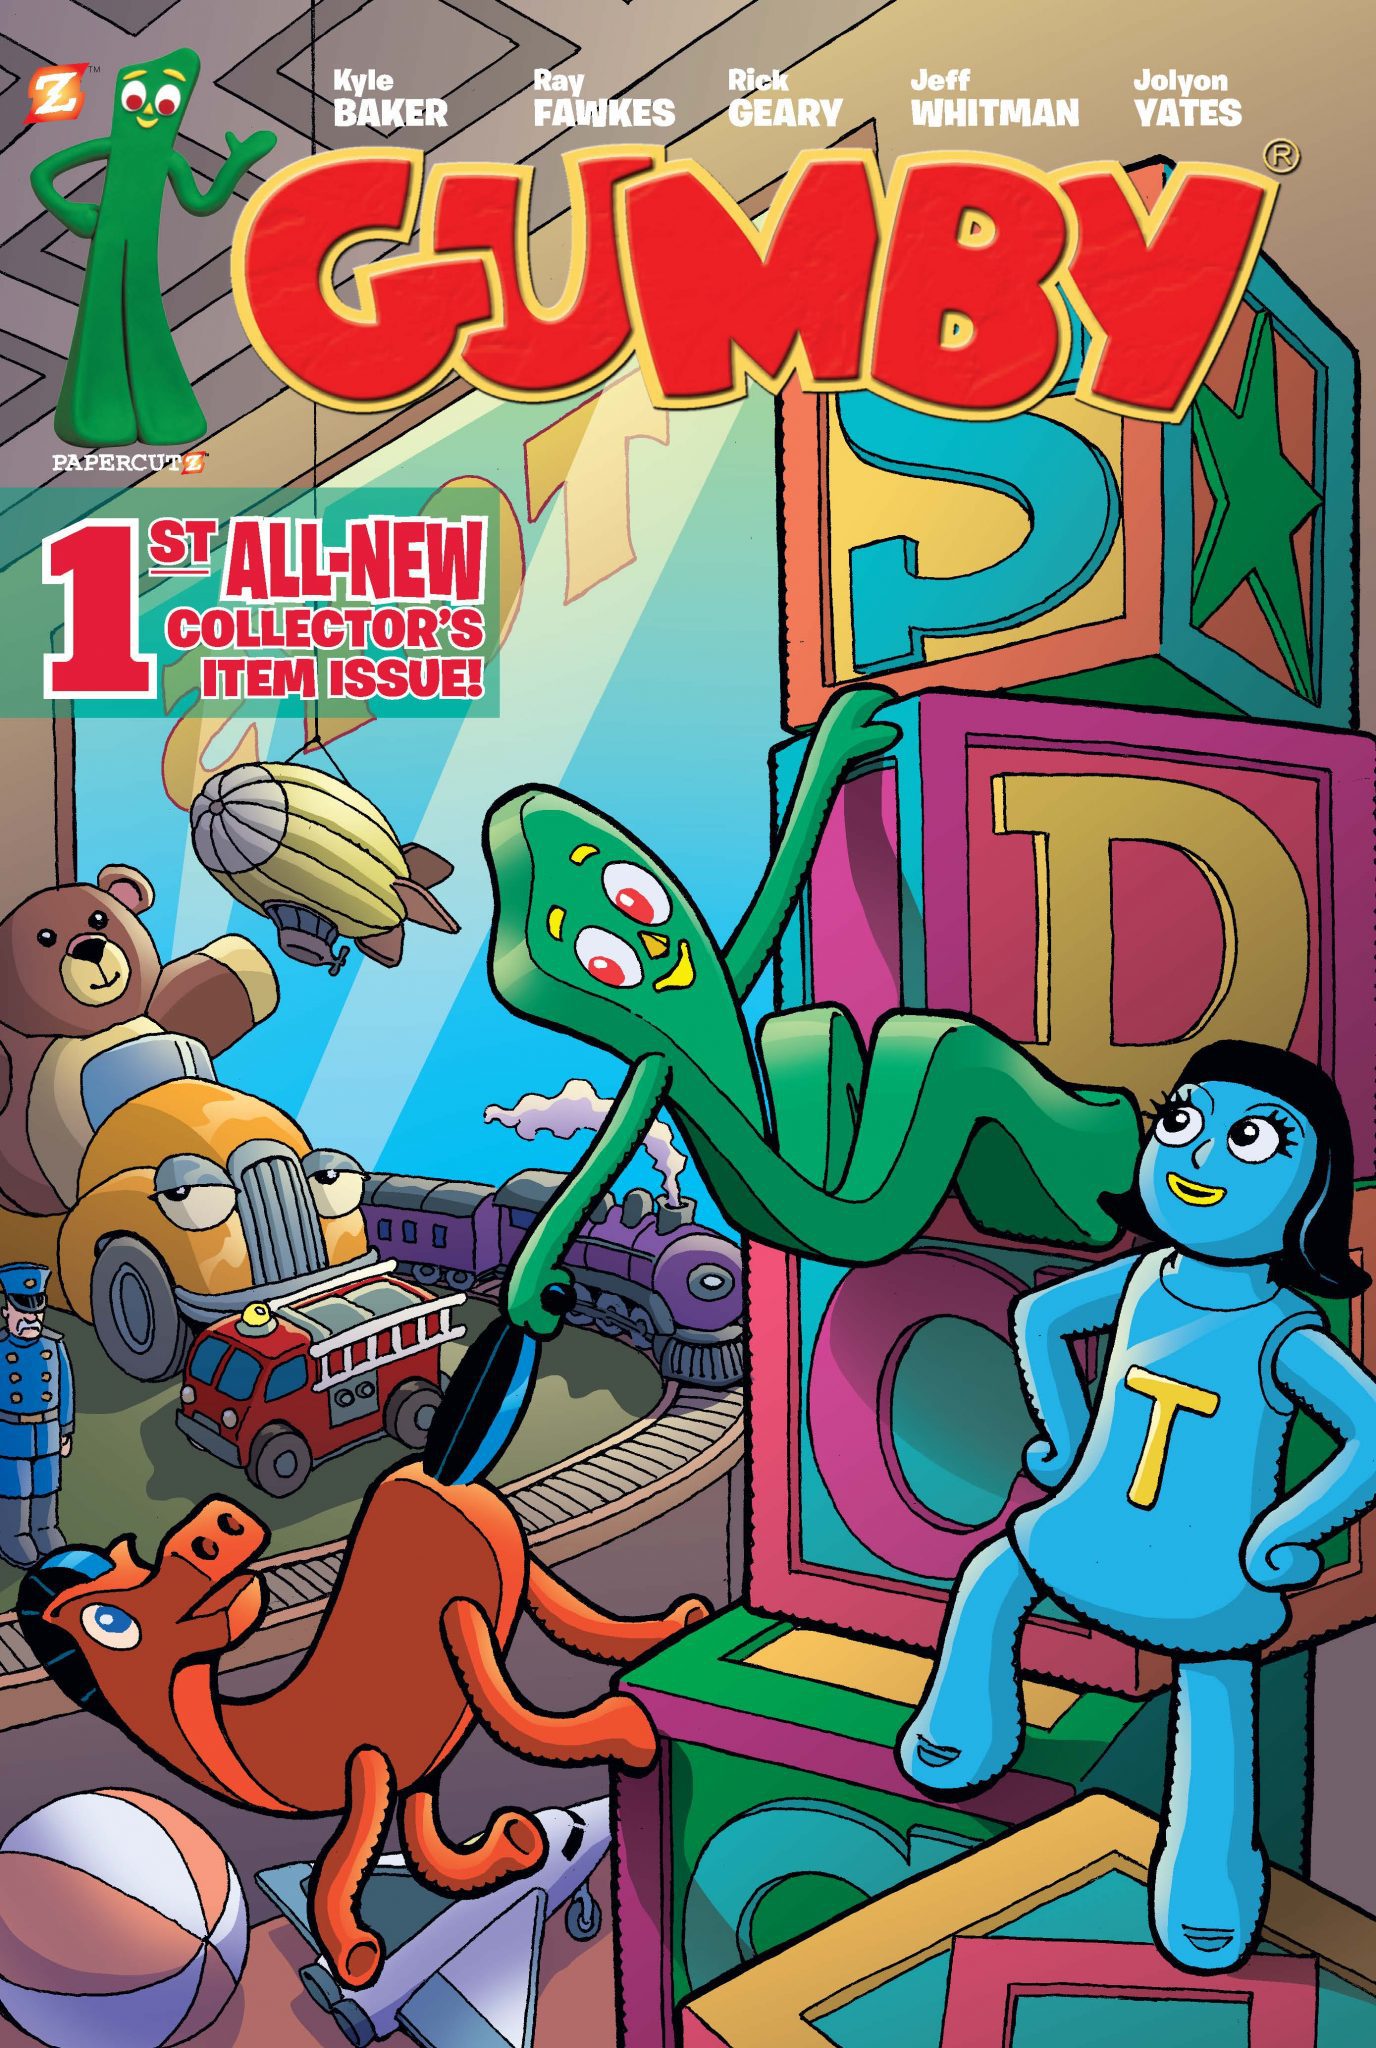 Gumby #1 Review